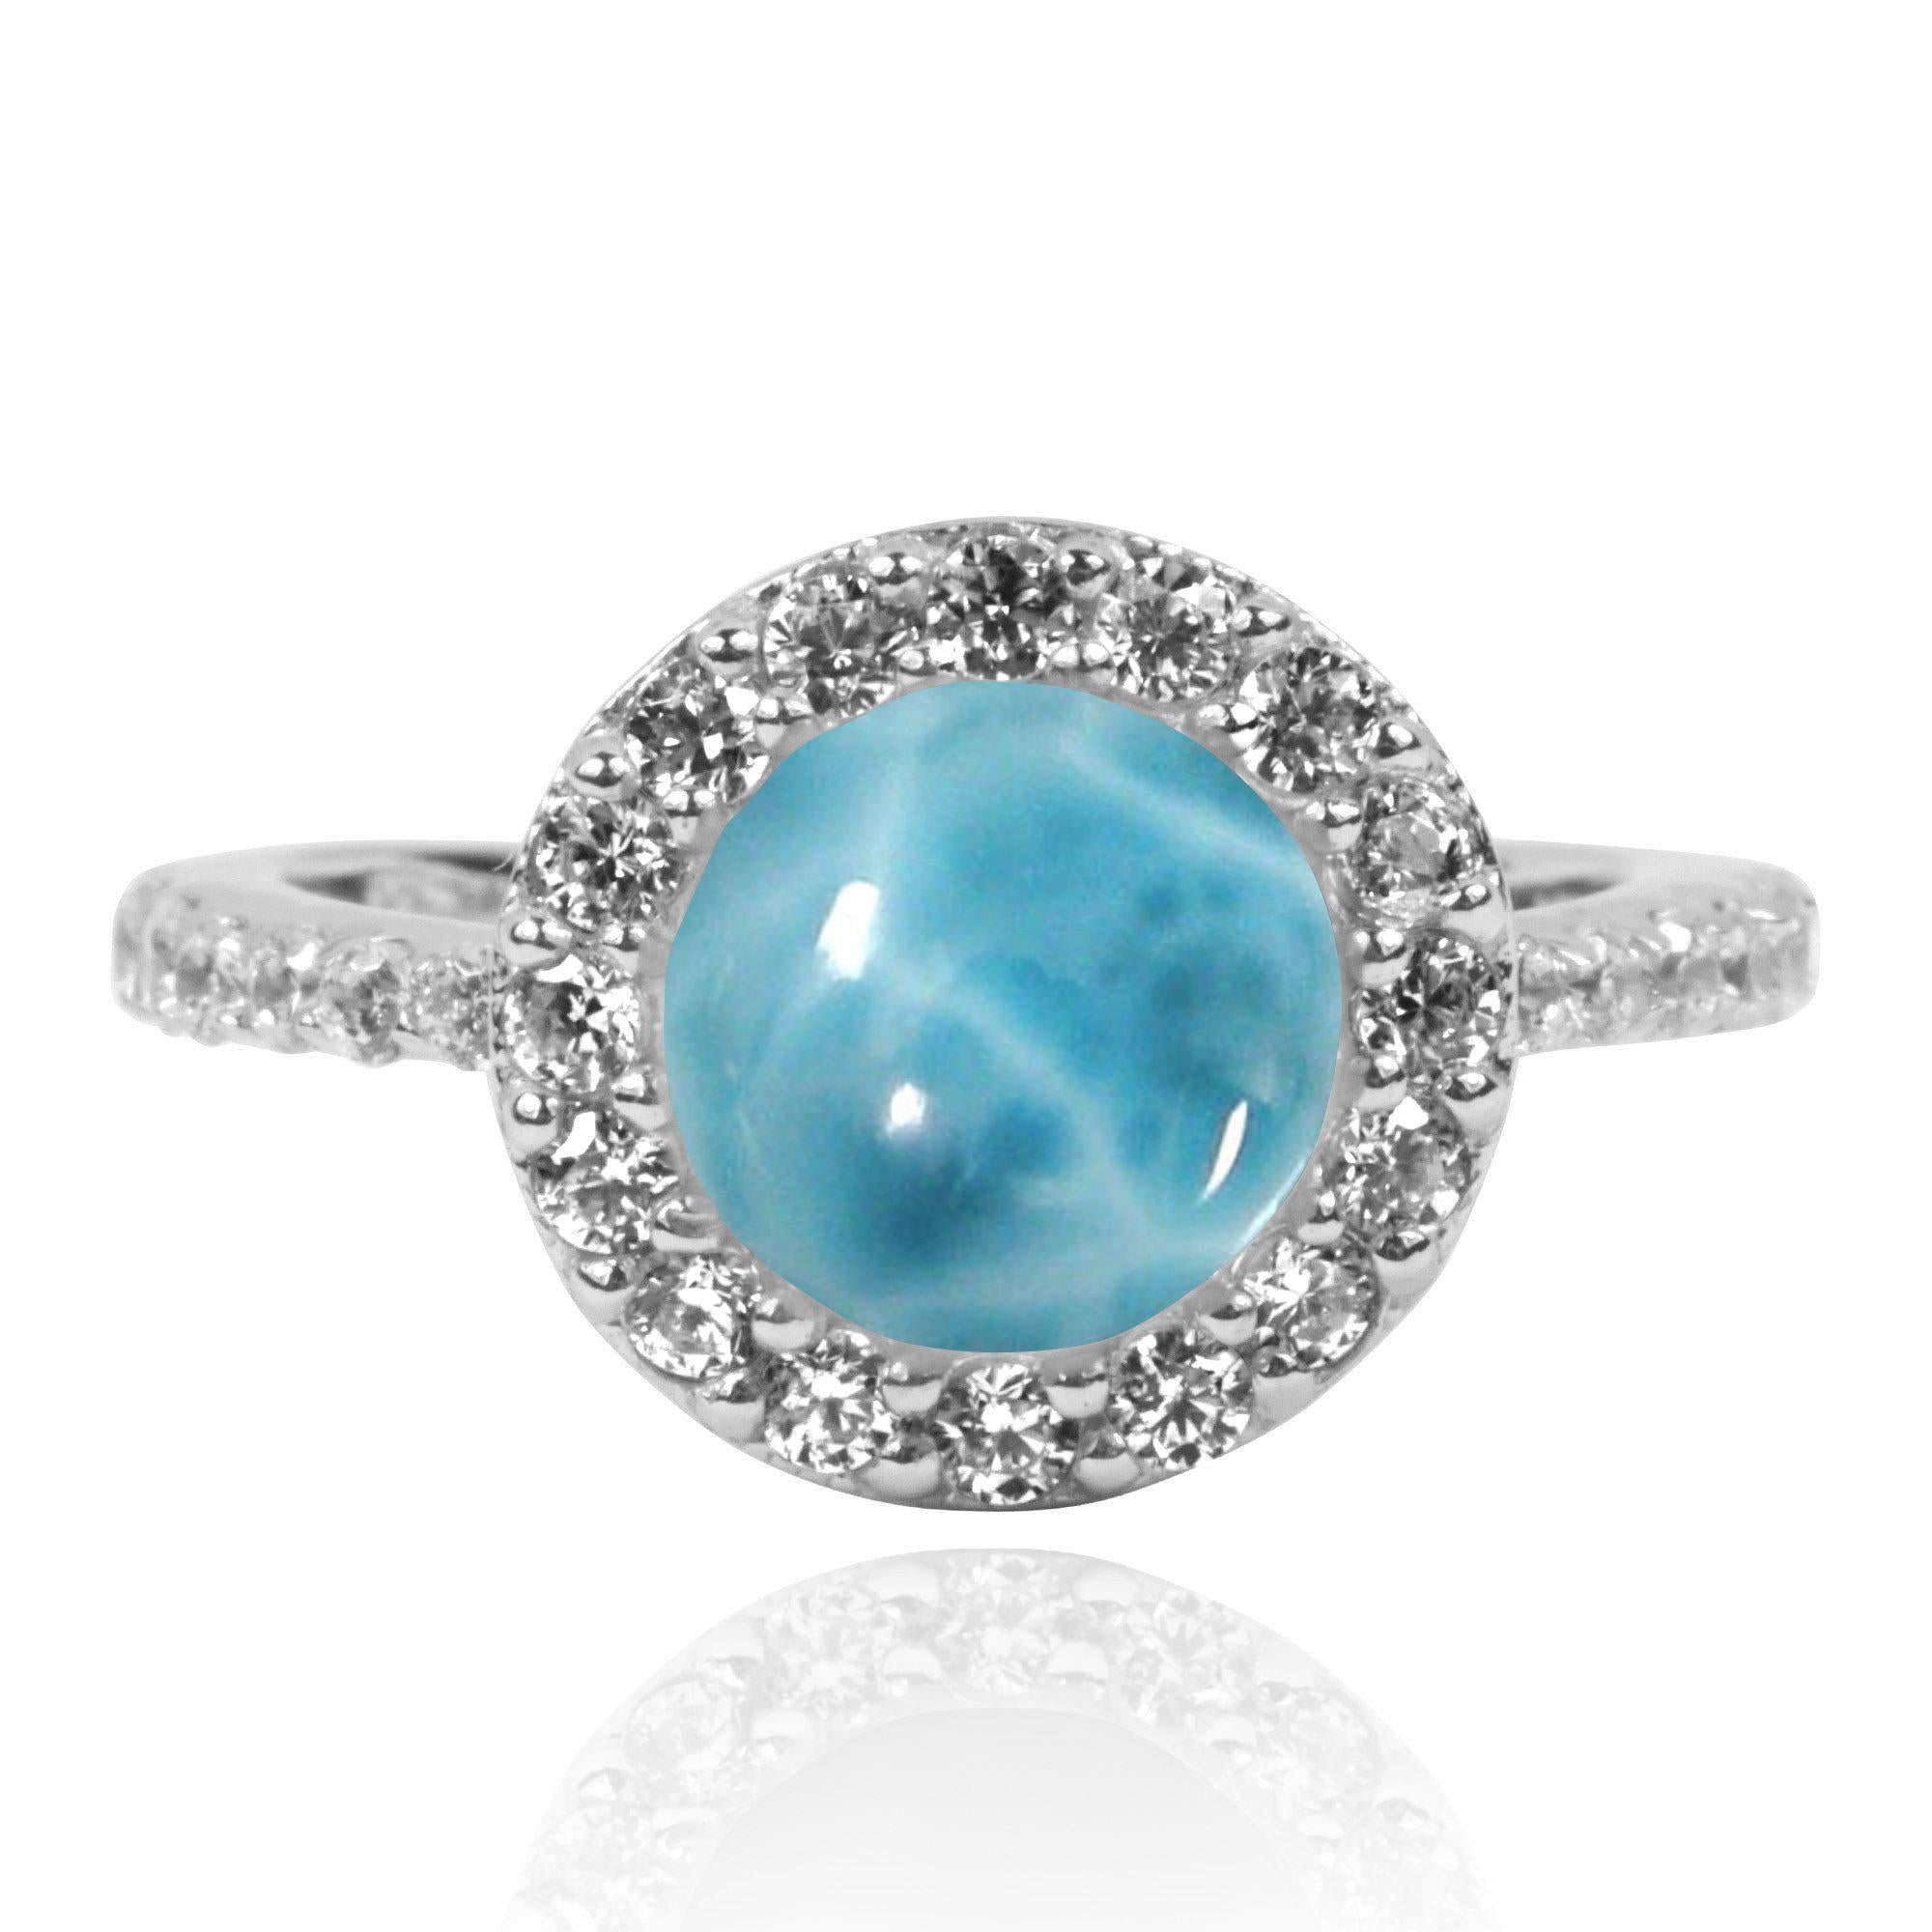 Larimar Cocktail Ring with 22 Round Shape White Topaz Stones and 8 Round Shape White Topaz Stones